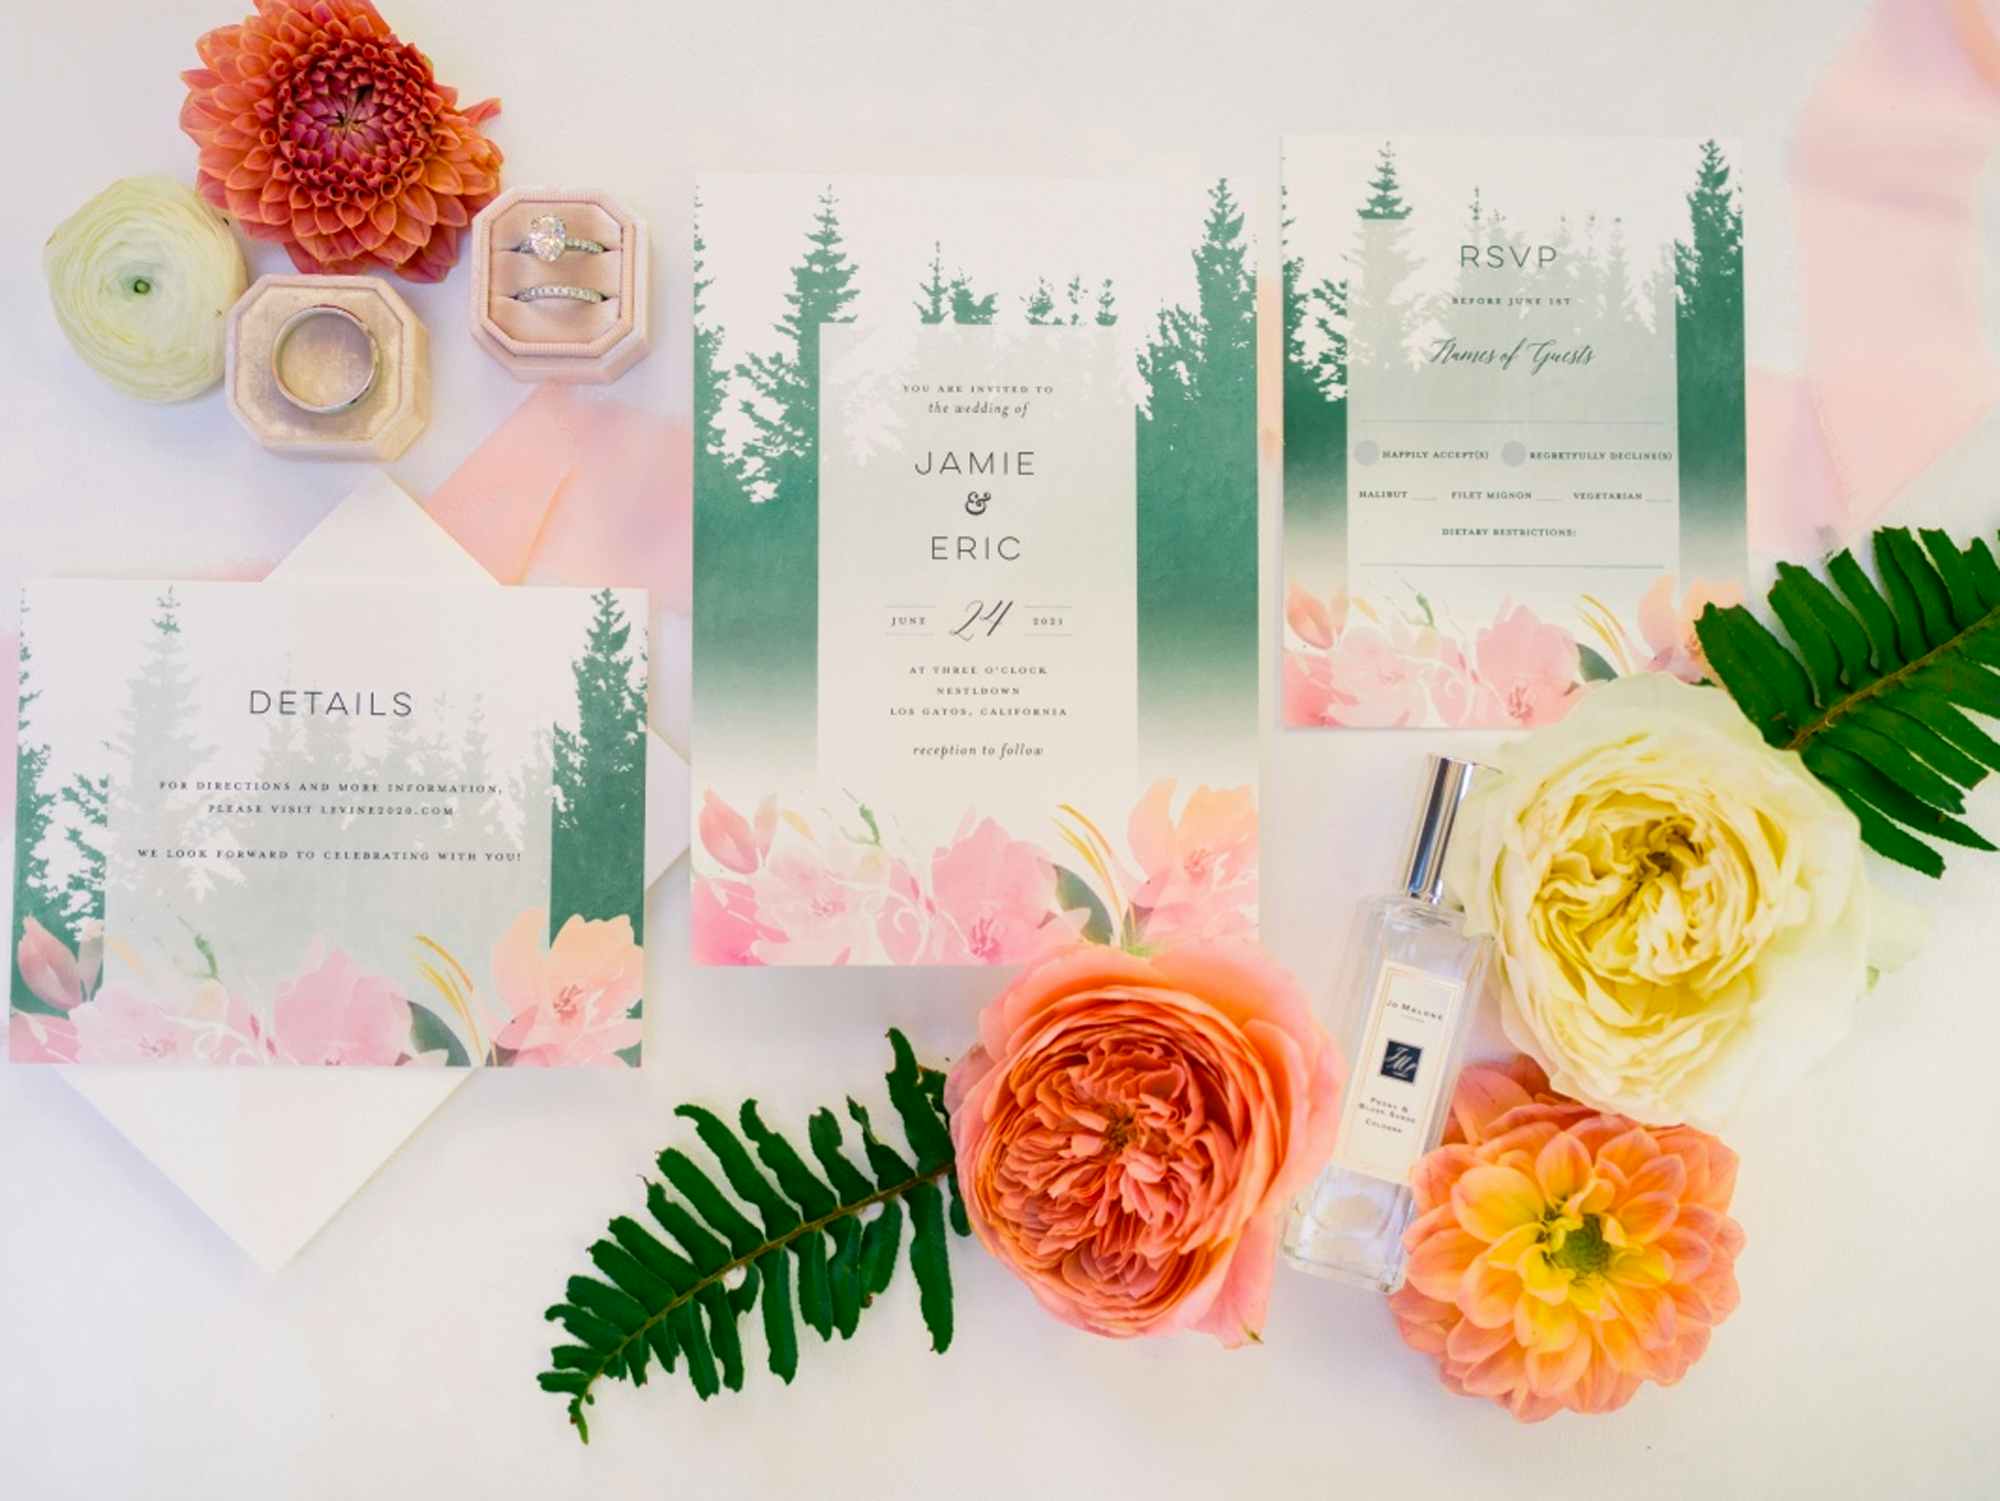 Custom wedding invitations from Wedding Chicks, laid out with some flowers